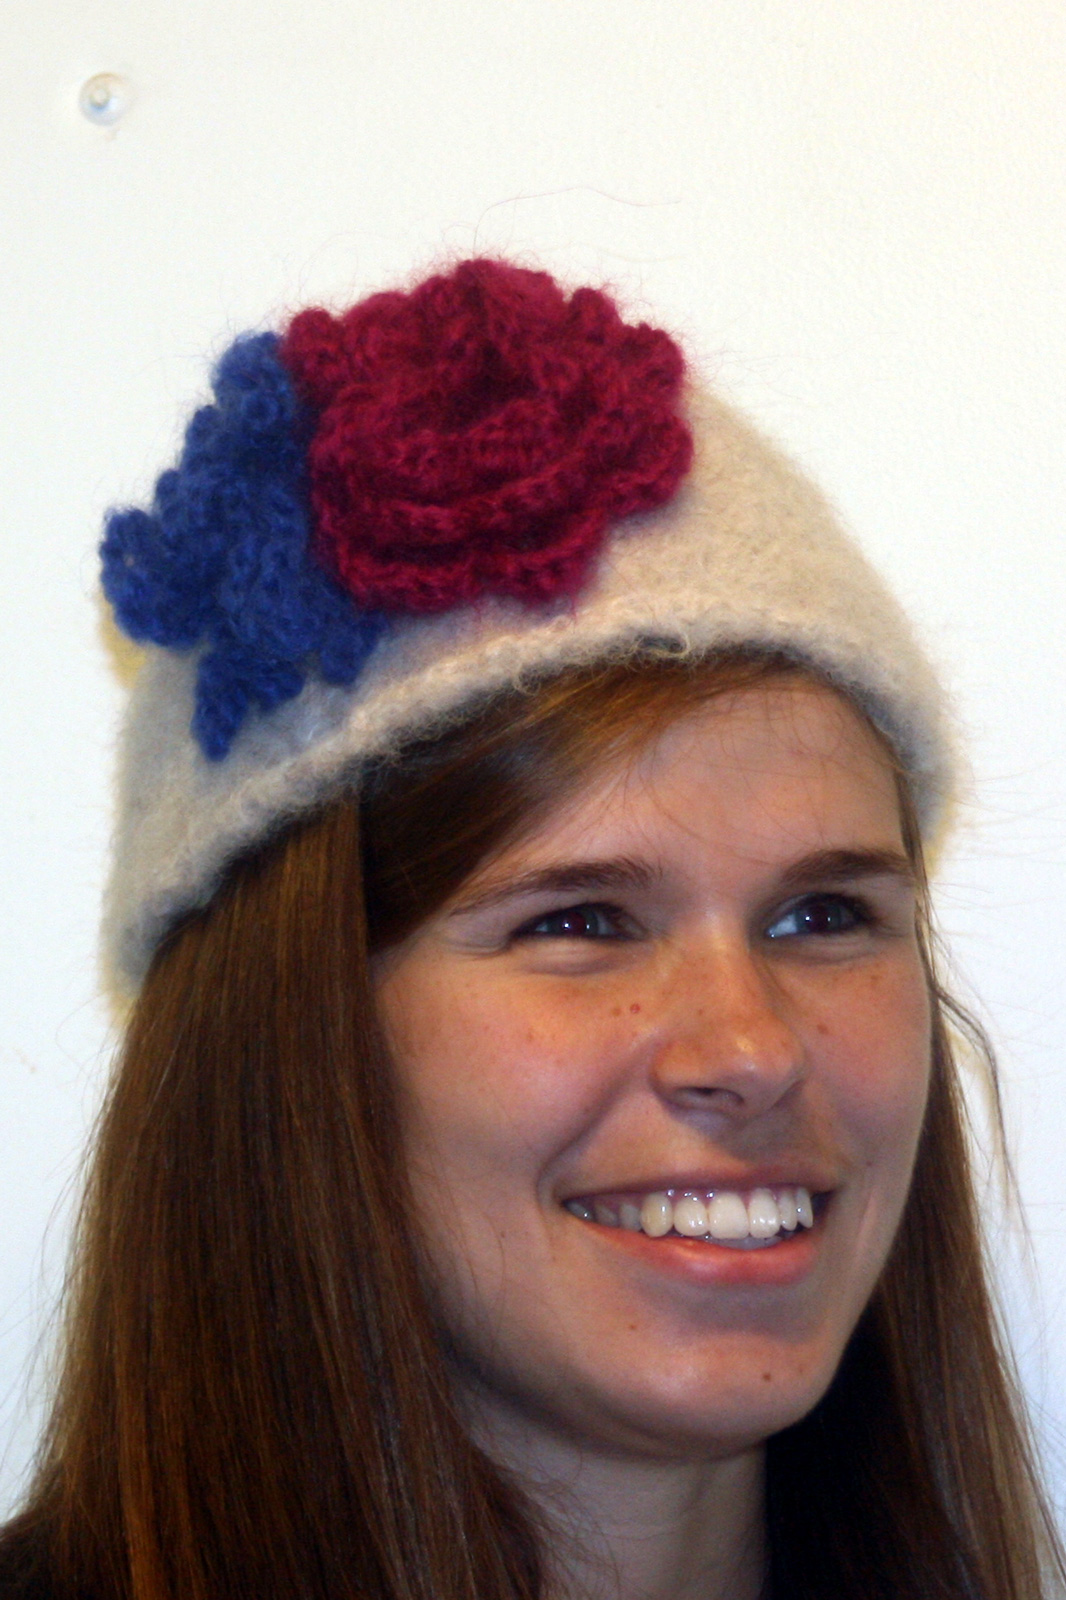 CROCHET HATS - HOW TO INFORMATION | EHOW.COM